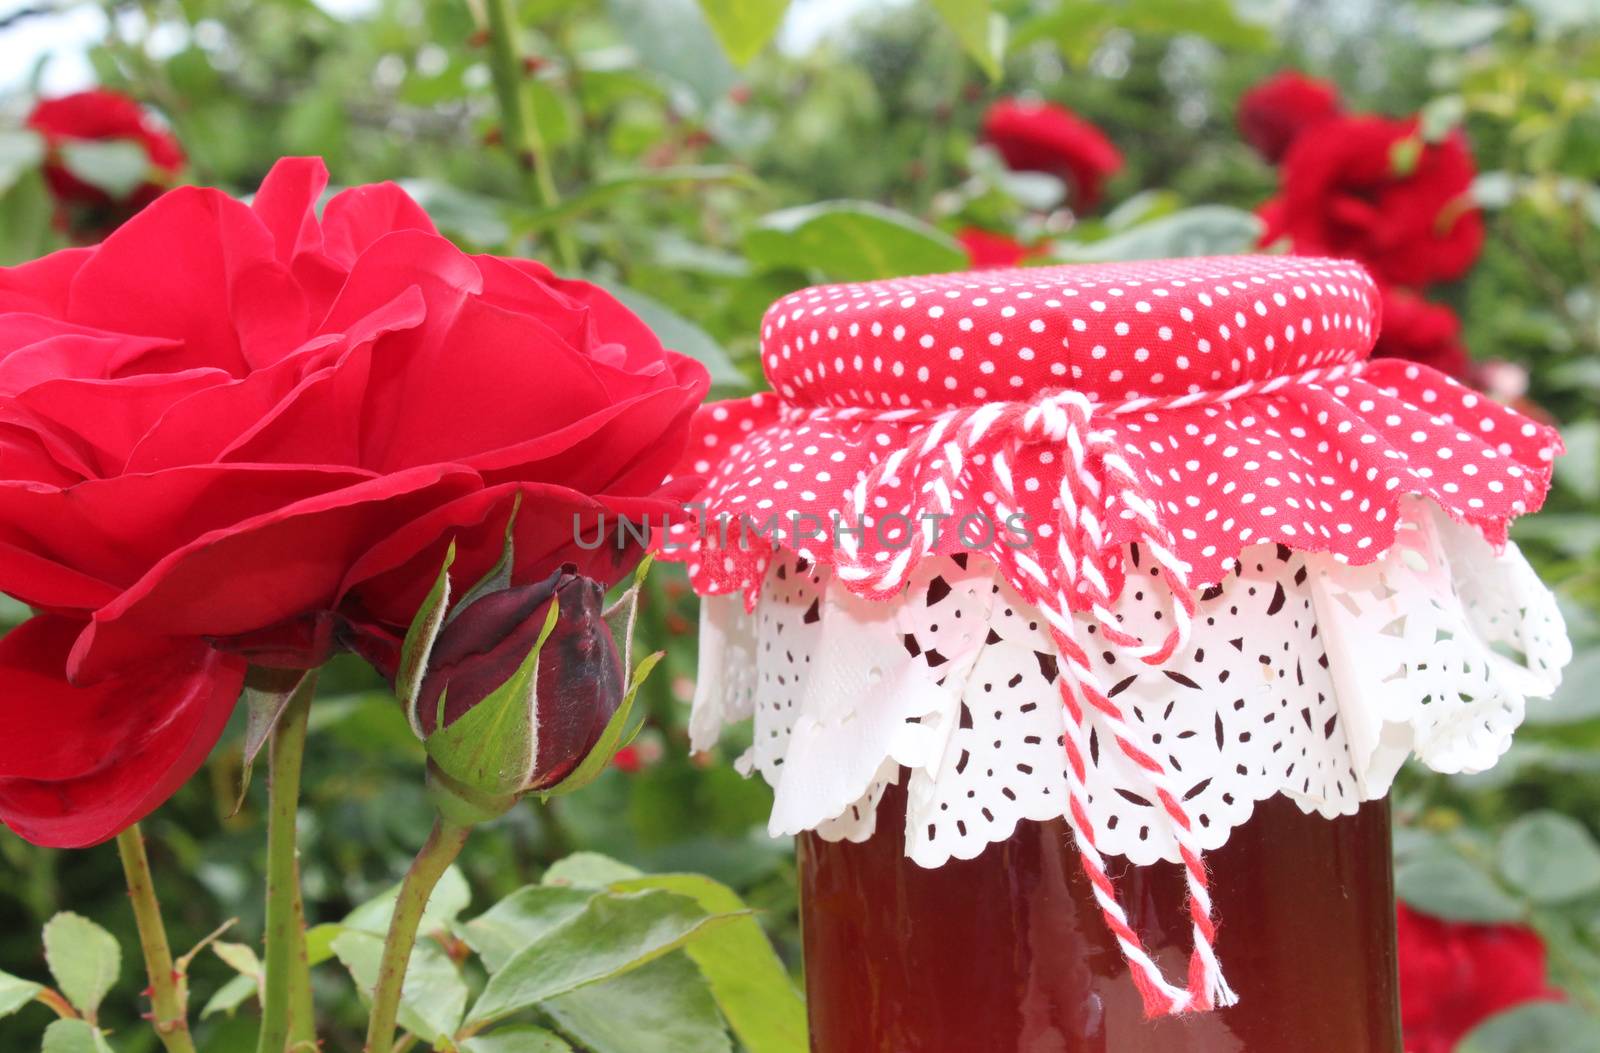 The picture shows rose jelly in the garden